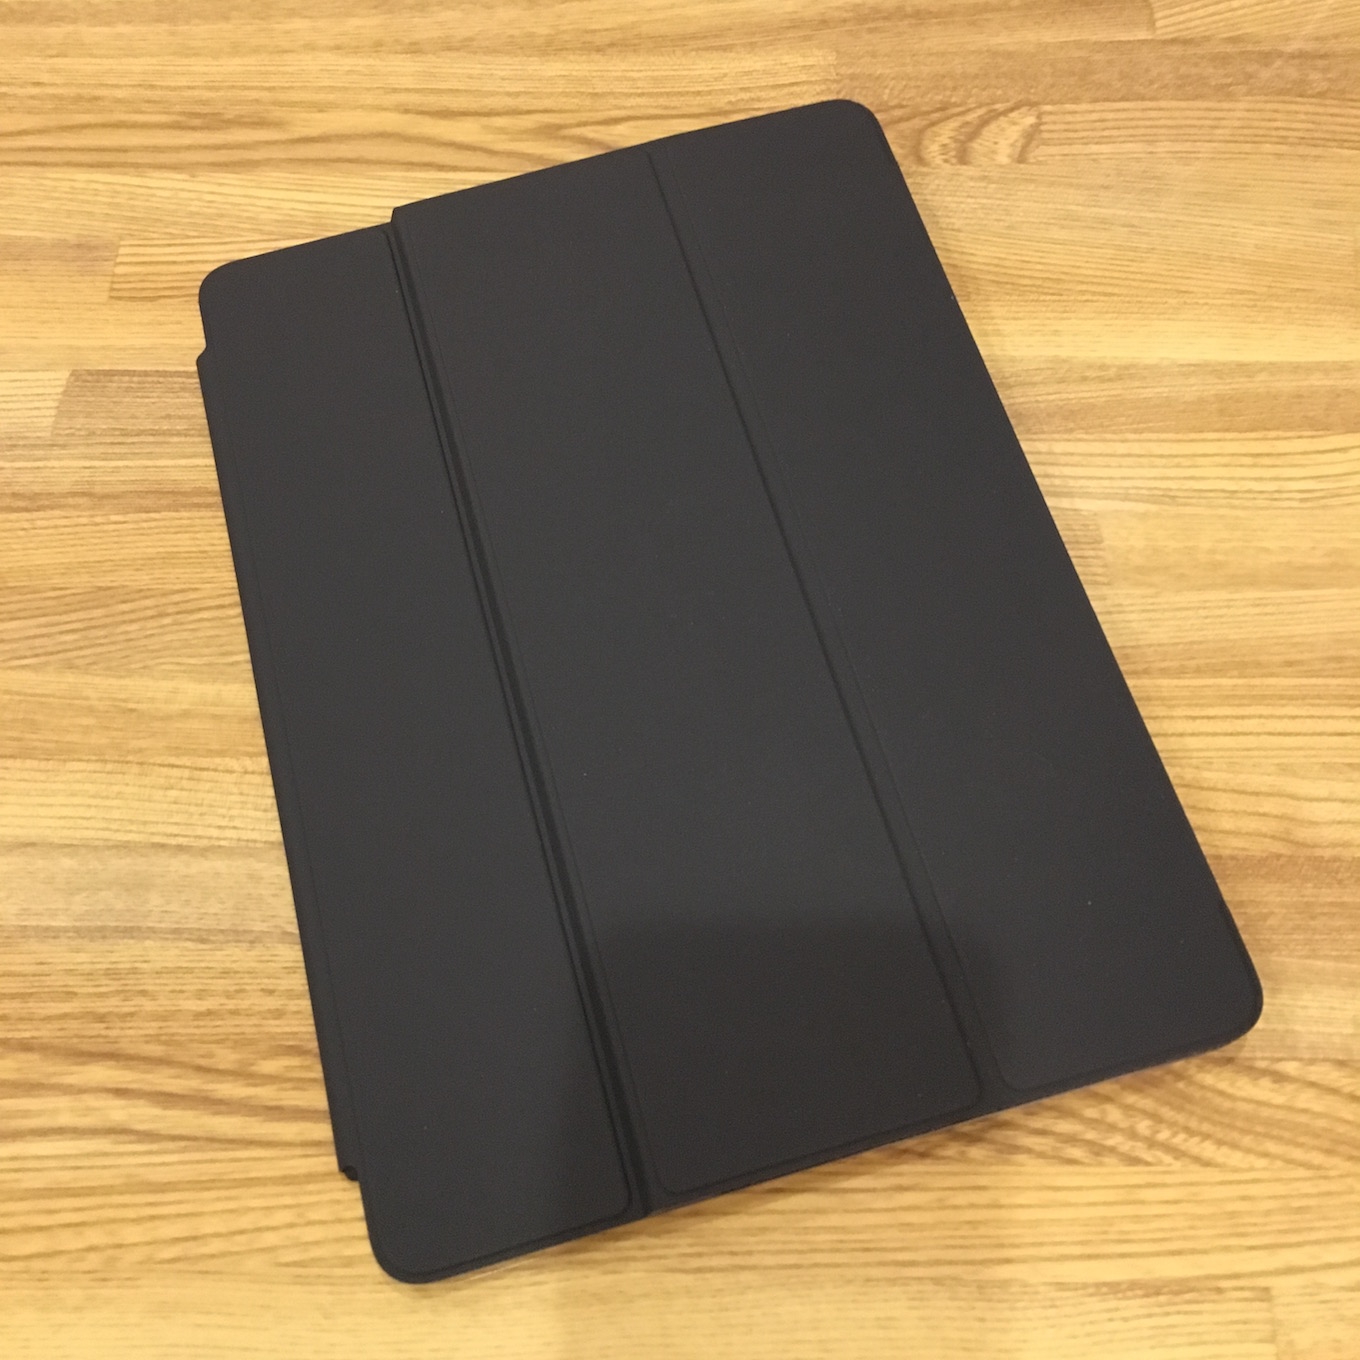 9.7inch_ipad_pro-review12